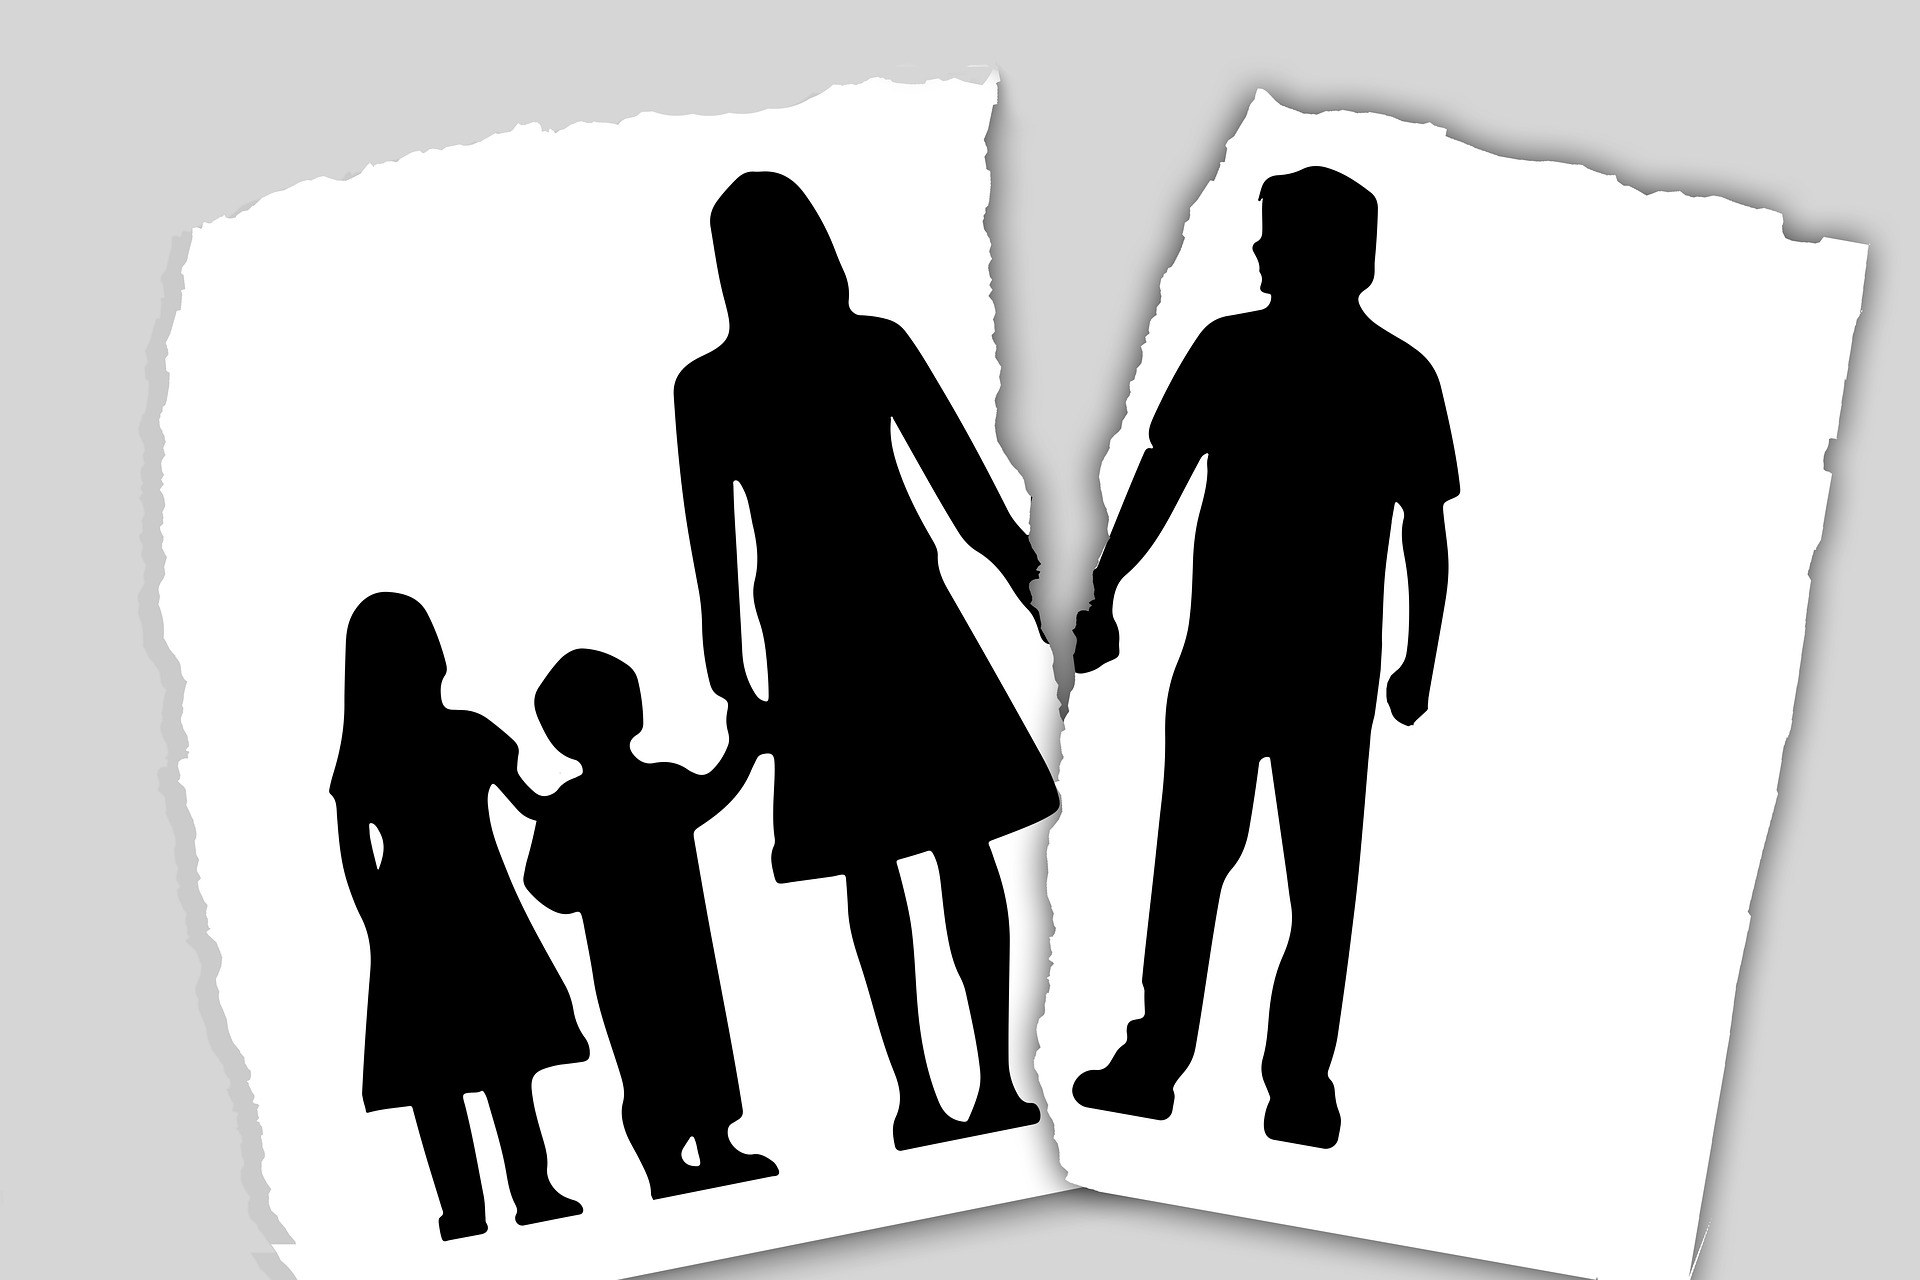 Silhouette of a family divided onto two torn pieces of paper, representing child custody issues in New Jersey with a mother and child on one side, and a father and child on the other.